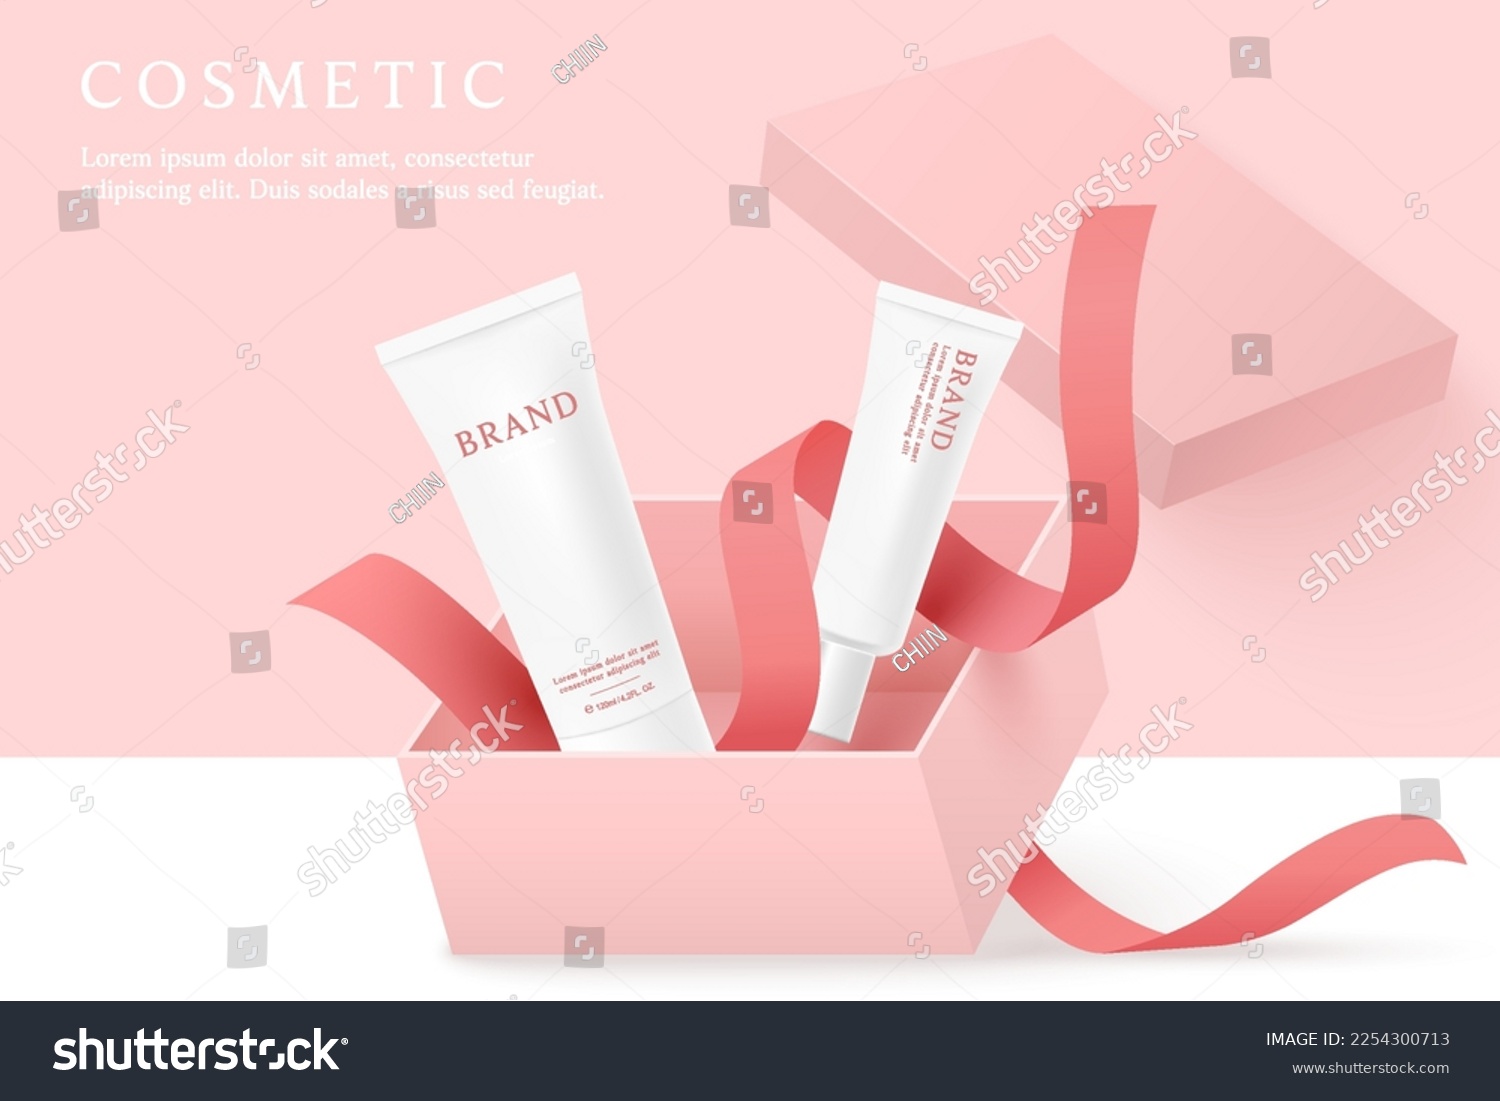 Cosmetics and skin care product ads template on pink background with gift box and ribbon. #2254300713